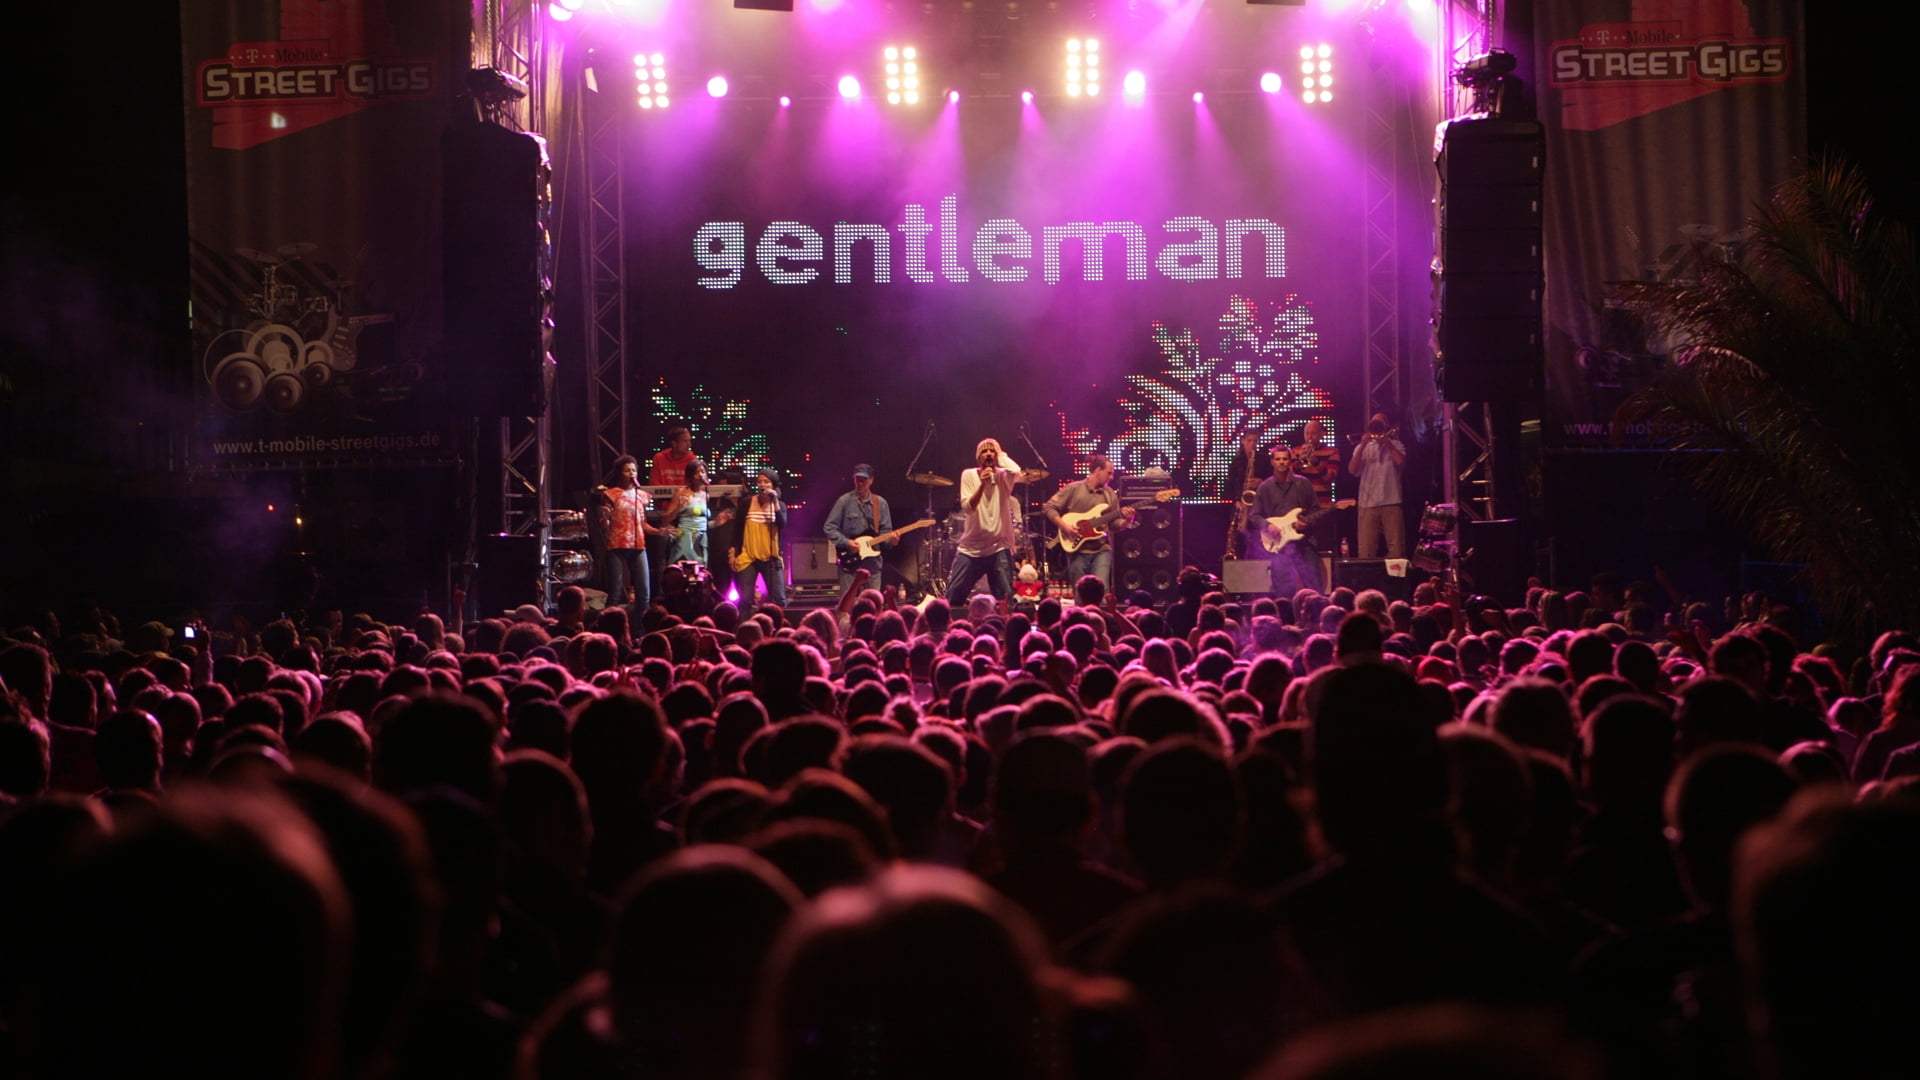 Gentleman band on stage in front of people